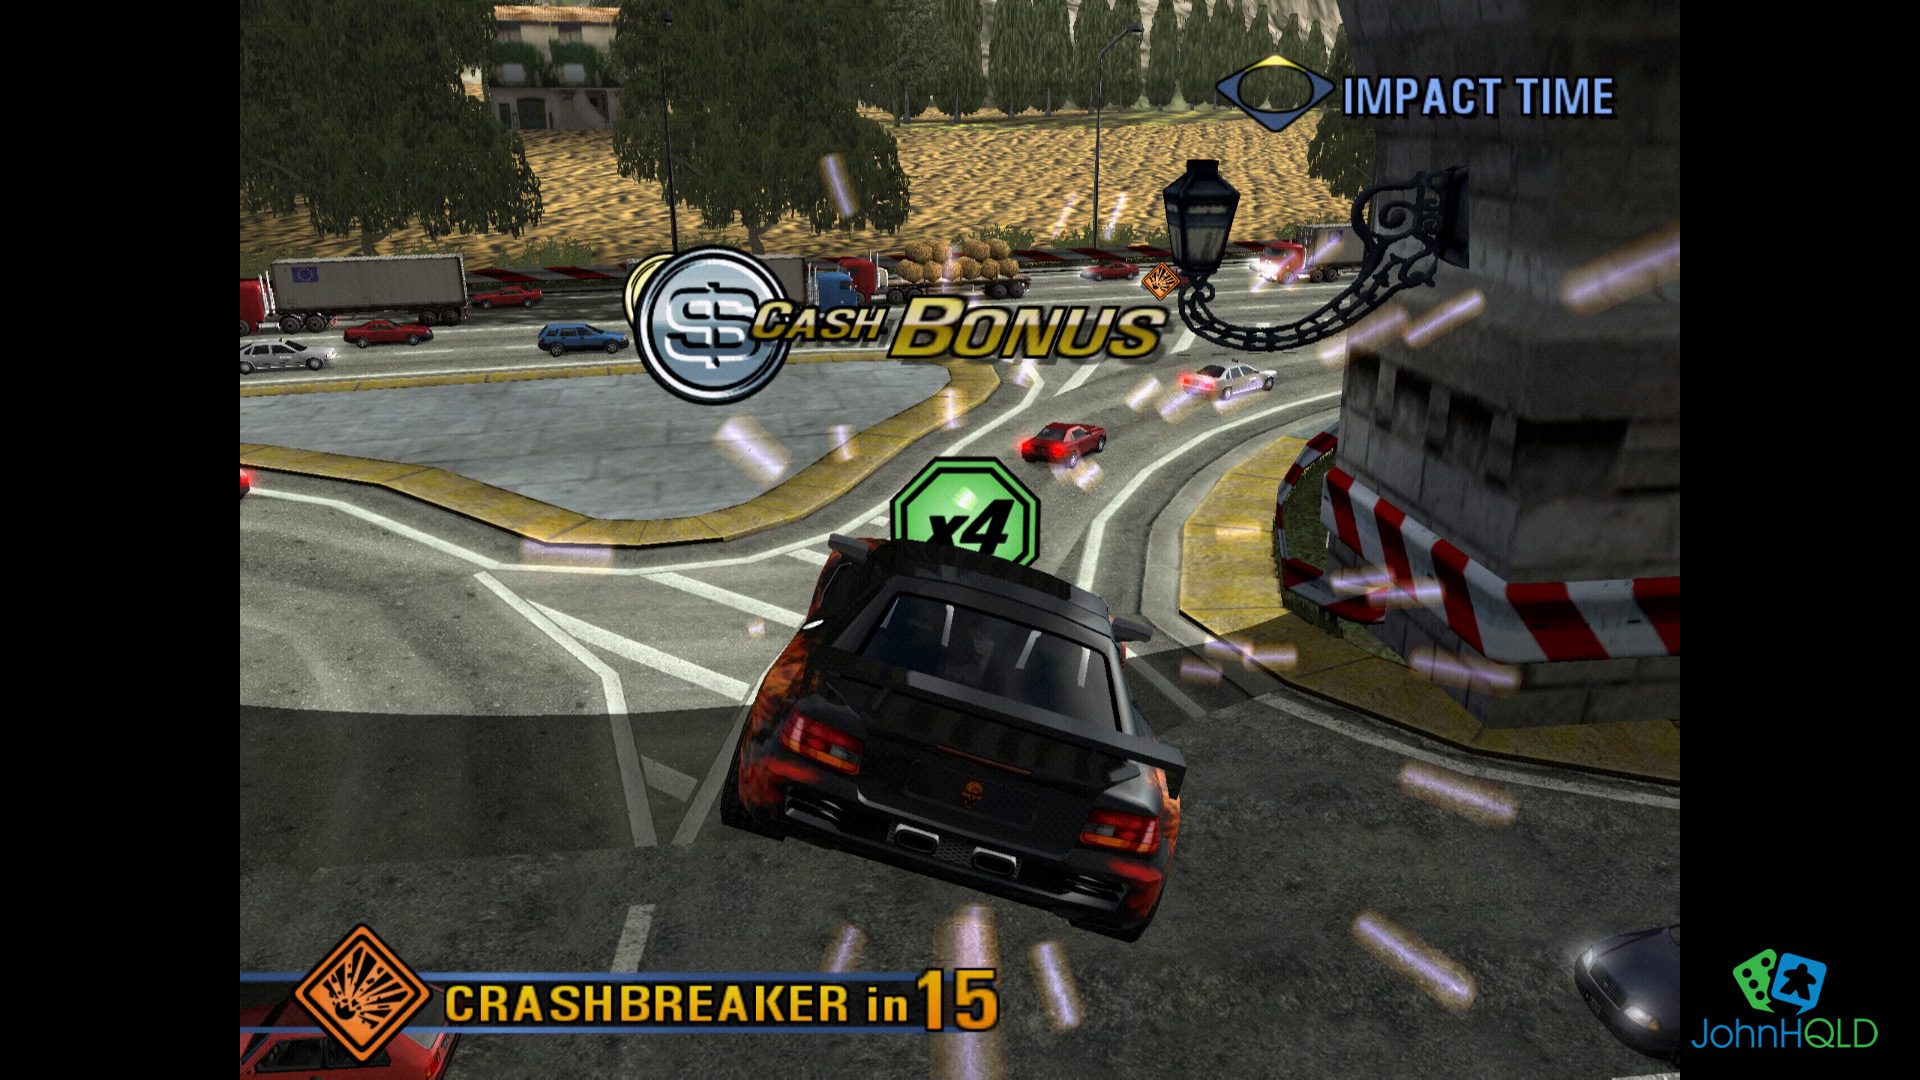 20220912 - Burnout 3 - Crash Junctions are way too much fun